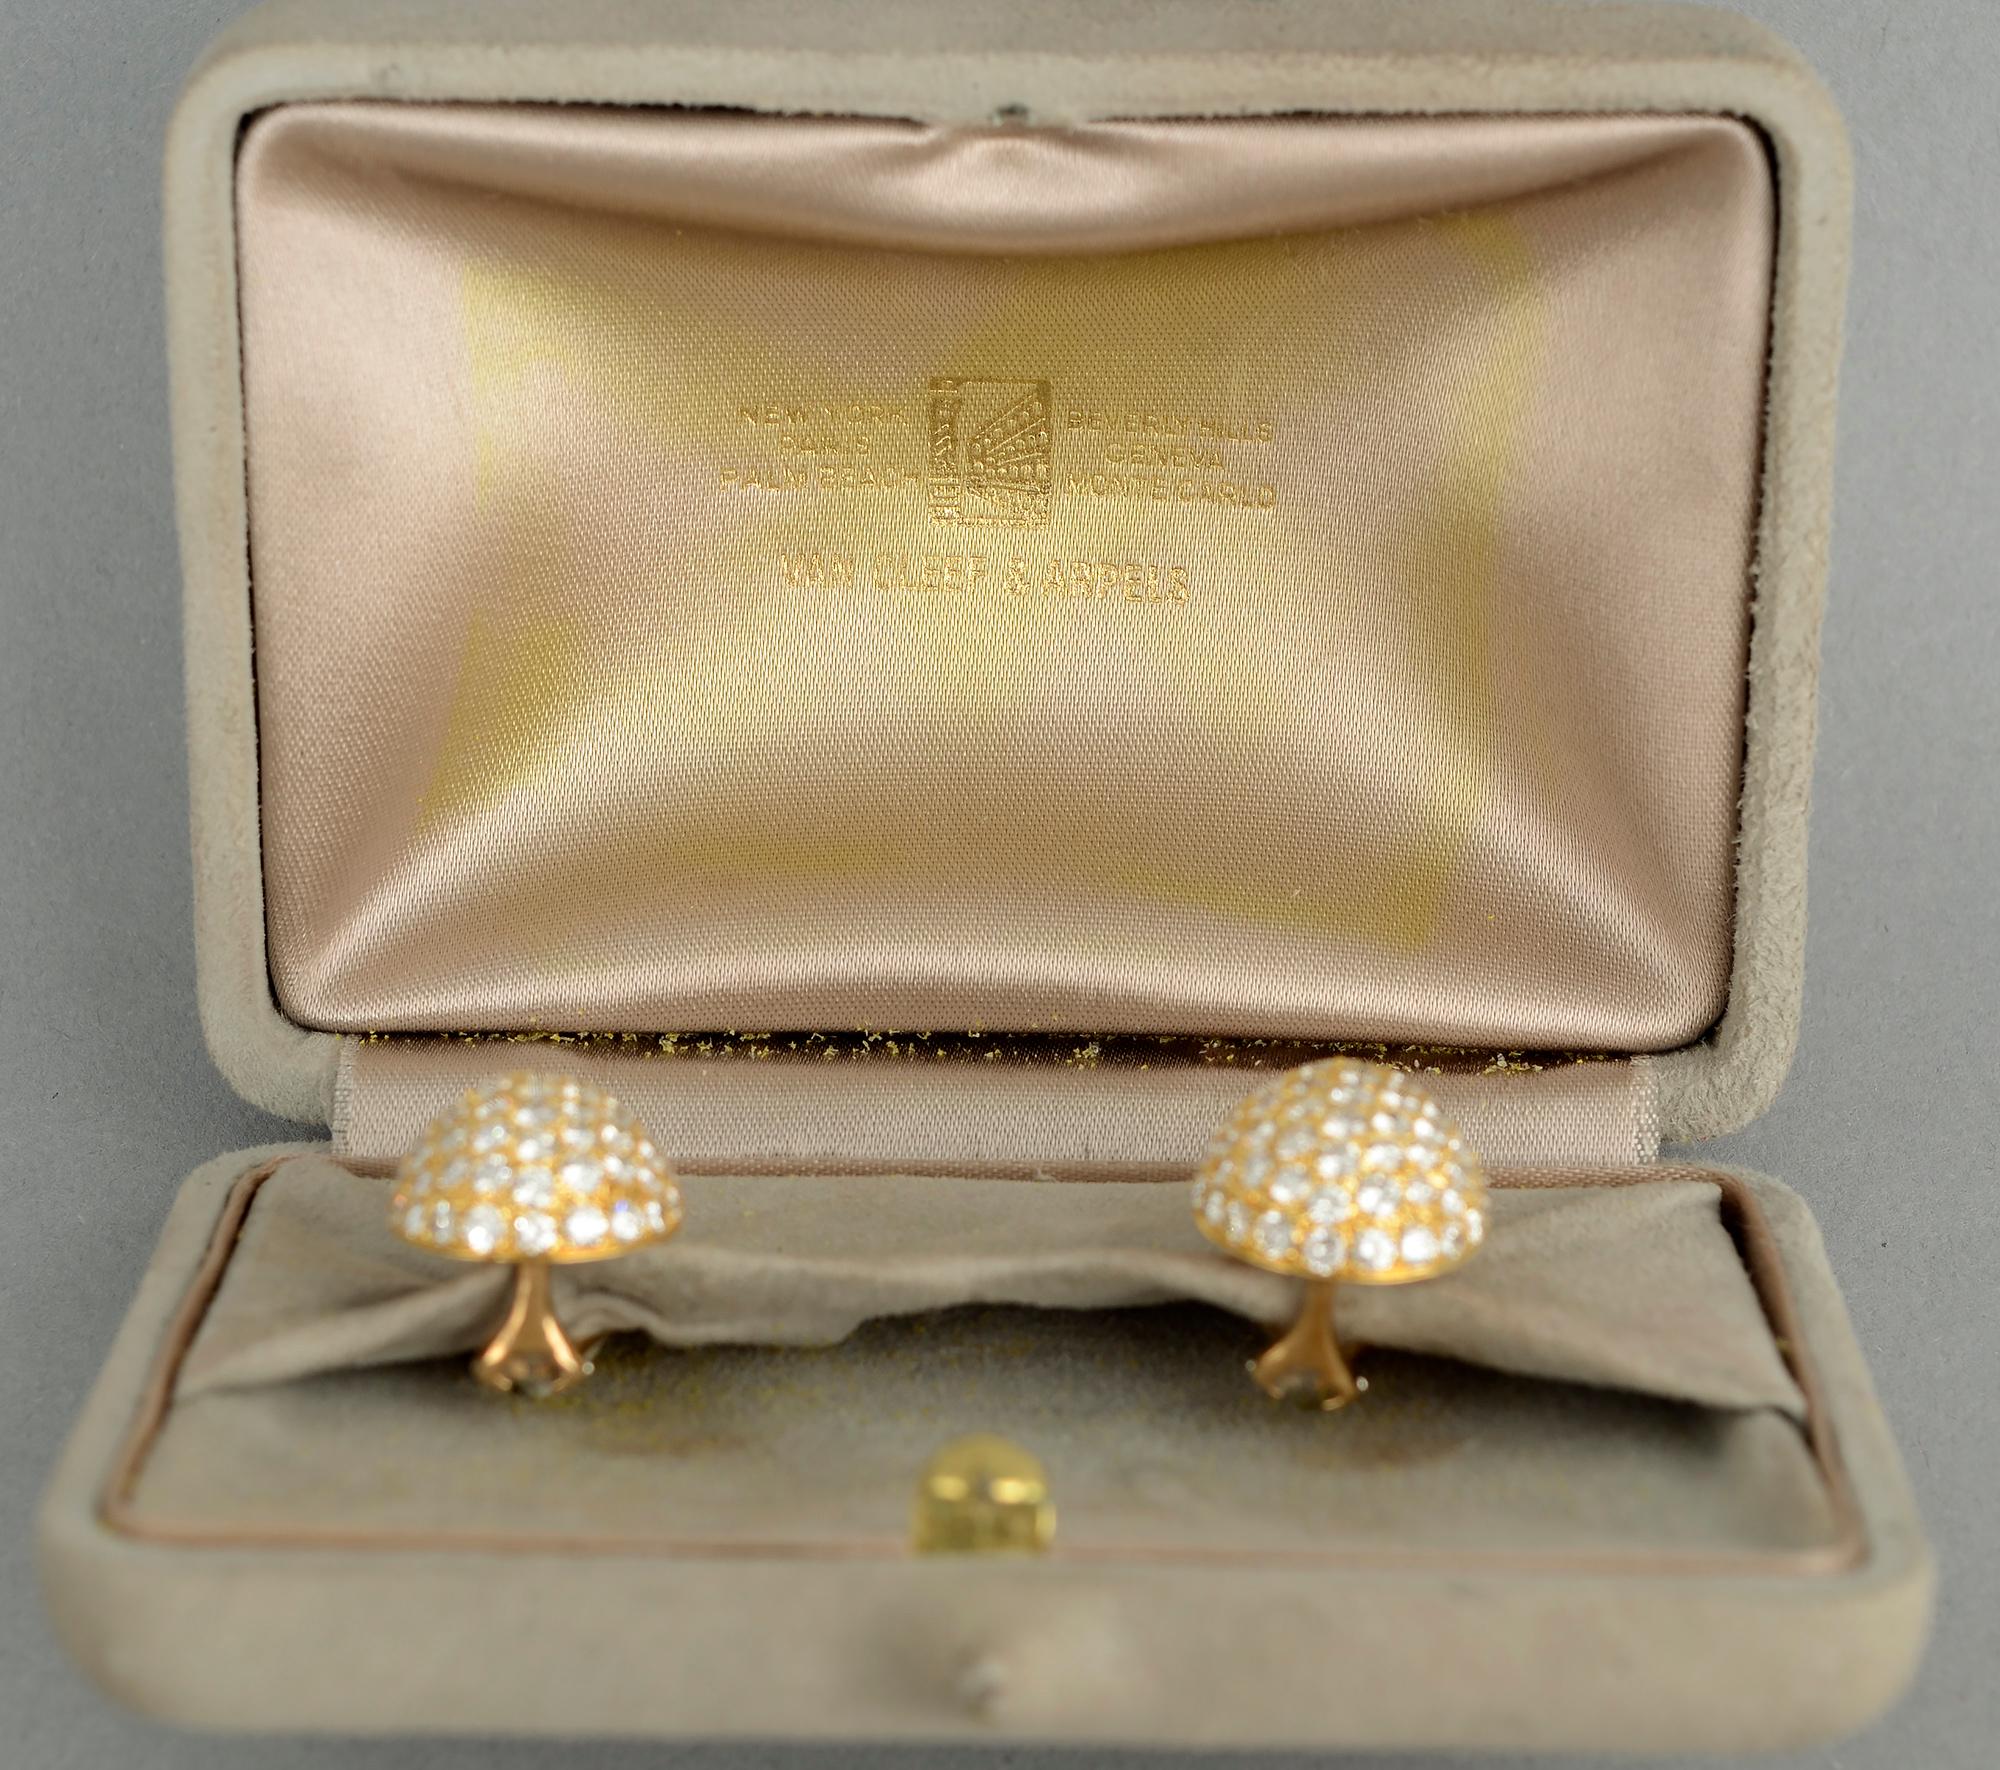 Van Cleef and Arpels pear shaped diamond earrings that are the ultimate in elegant simplicity. The earrings are made of 154 diamonds with a total  weight of approximately 7 carats. The stones are E and F color; VVS1 quality. Backs are clips and